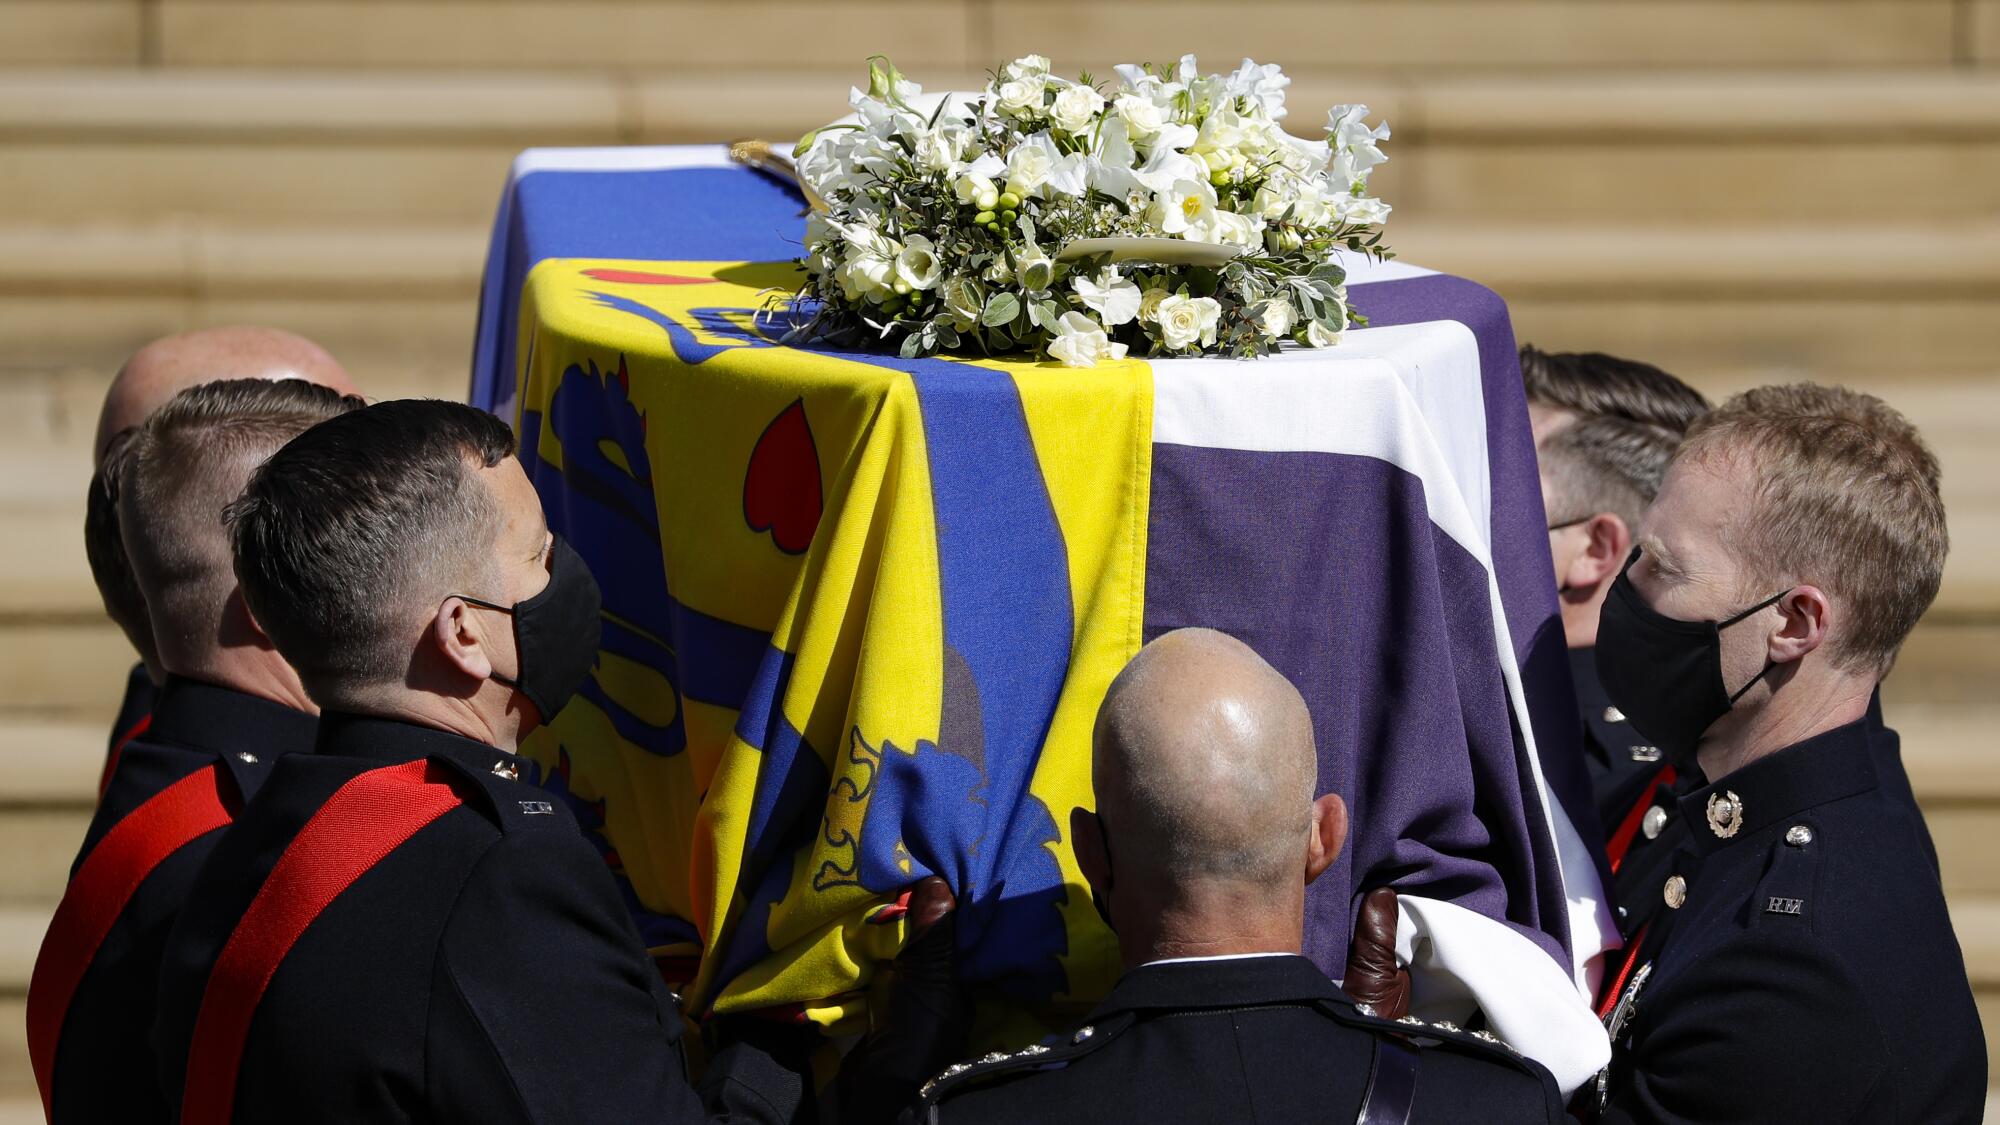 A closeup of the coffin with a multicolored cloth covering and flowers on it as pallbearers carry it up stairs.